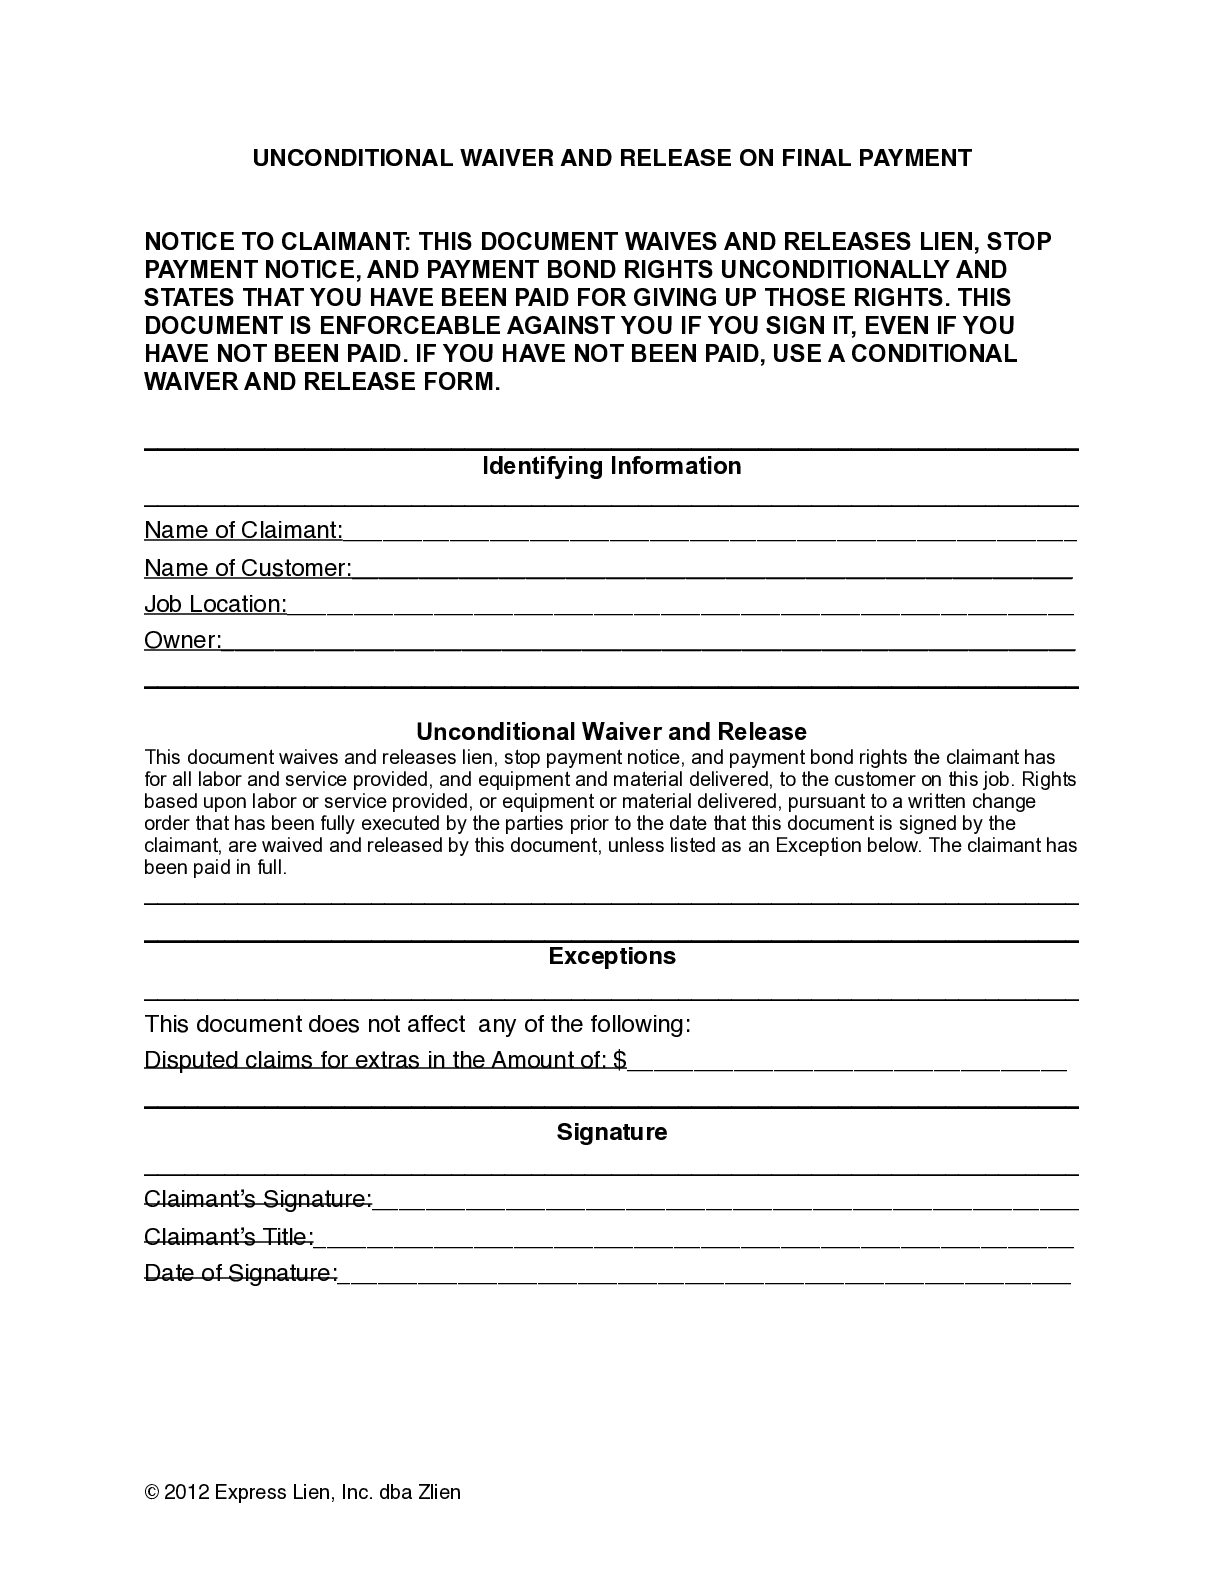 Maryland Final Unconditional Lien Waiver Form